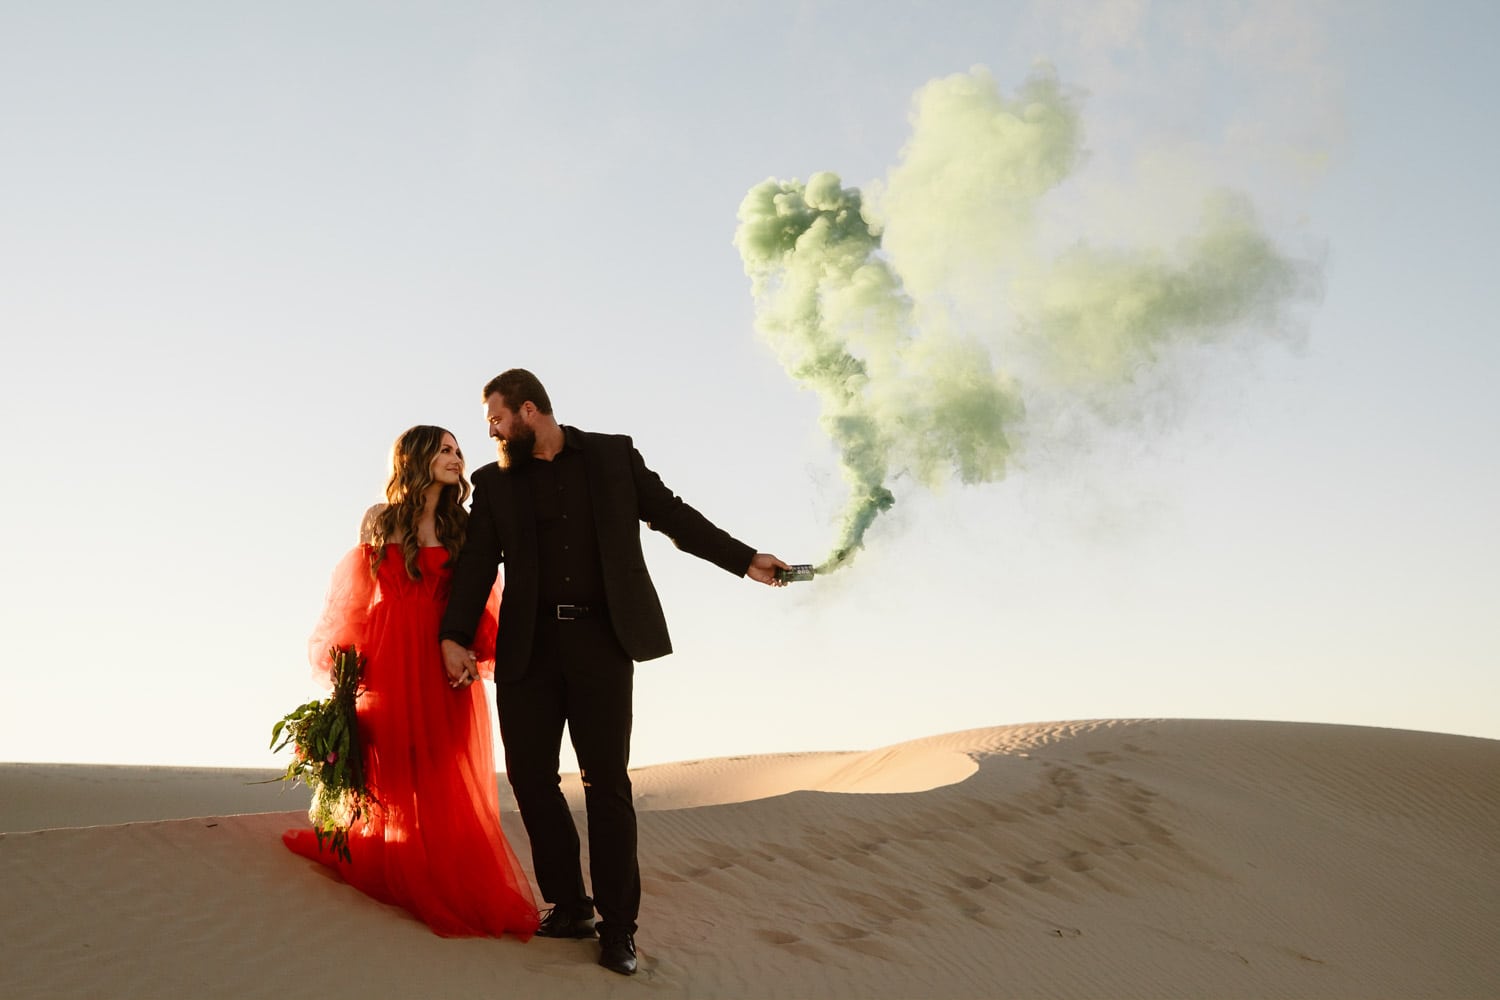 A couple stands hand in hand on the Glamis Sand Dunes with a billowing green smoke flare behind them, the woman in a vibrant red dress and the man in a dark suit.